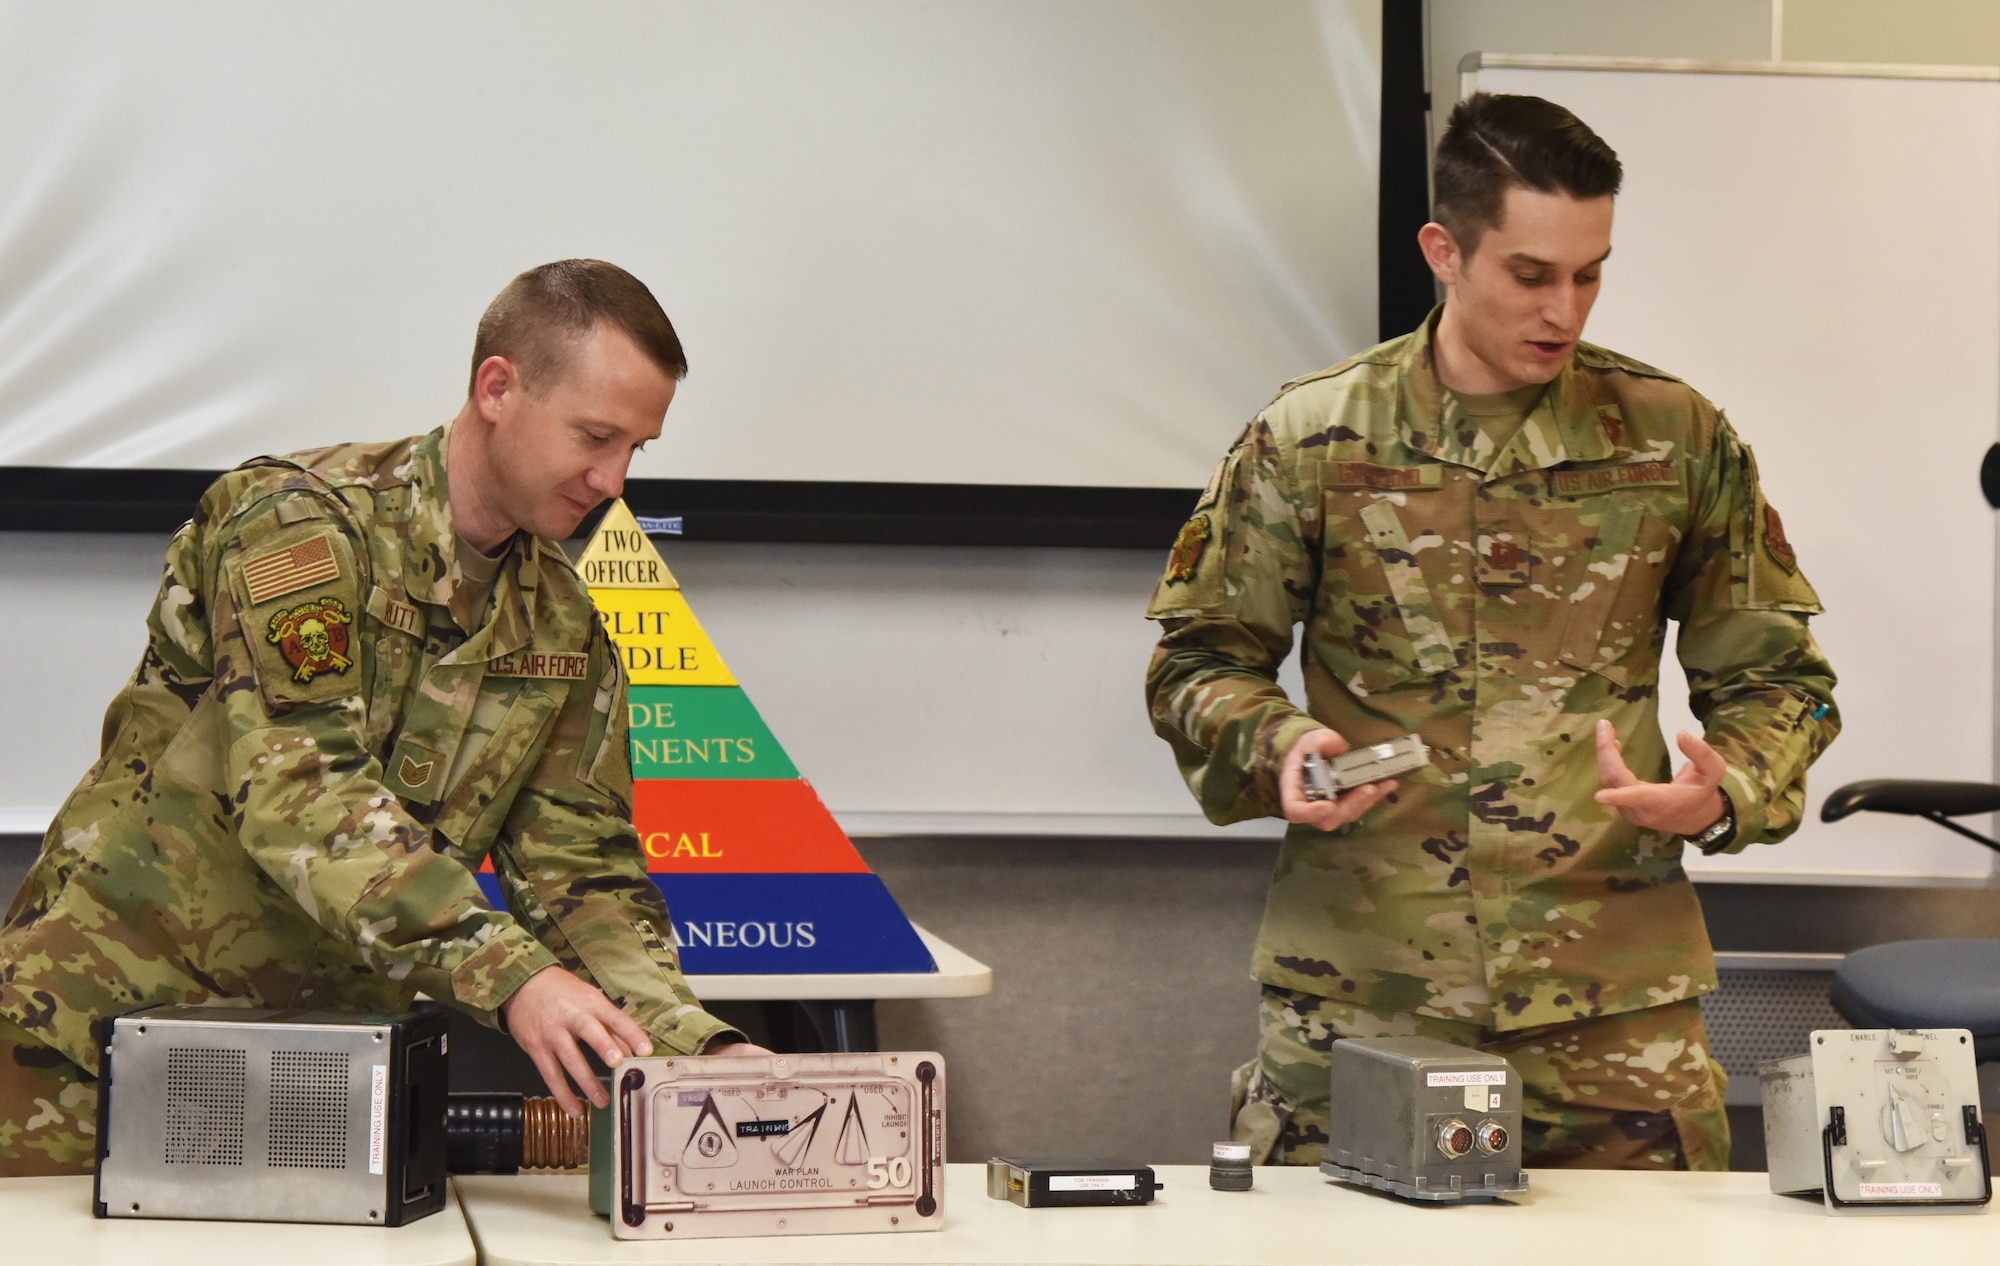 Tech. Sgt. Seth Rutt, 341st Operations Support Squadron nuclear cryptographic controller, left, and Capt. Alexander Garland, 341st OSS nuclear cryptographic operator, examine nuclear launch code training equipment May 19, 2021, on Malmstrom Air Force Base, Mont. In order to launch a missile there are various steps that must be verified by using the shown equipment. (U.S. Air Force photo by Tech. Sgt. Joseph Park)